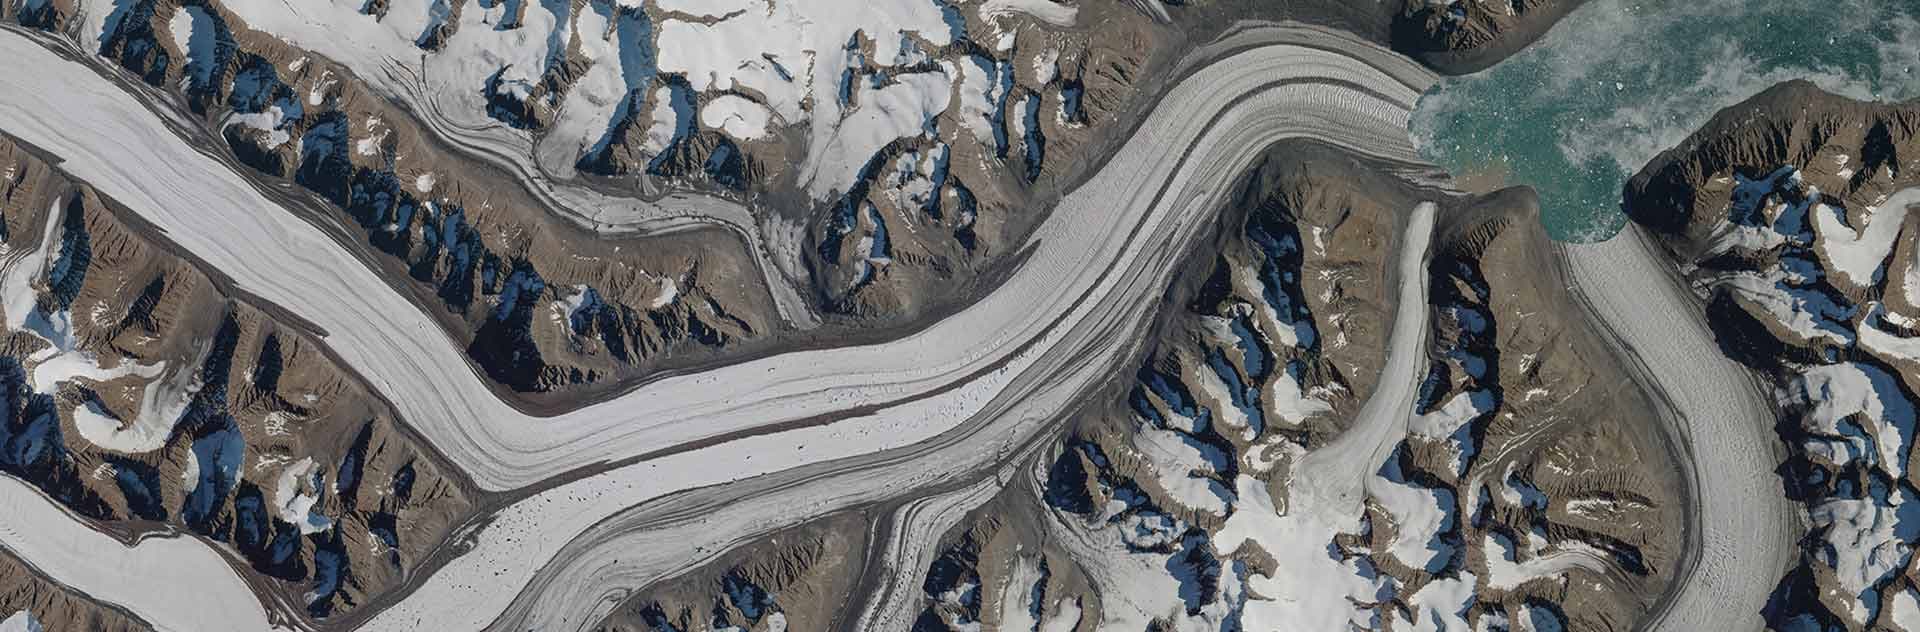 The entire coast of Greenland is now ice free, unveiling spectacular, previously unknown landscapes through the lens of SPOT and Pléiades satellites.